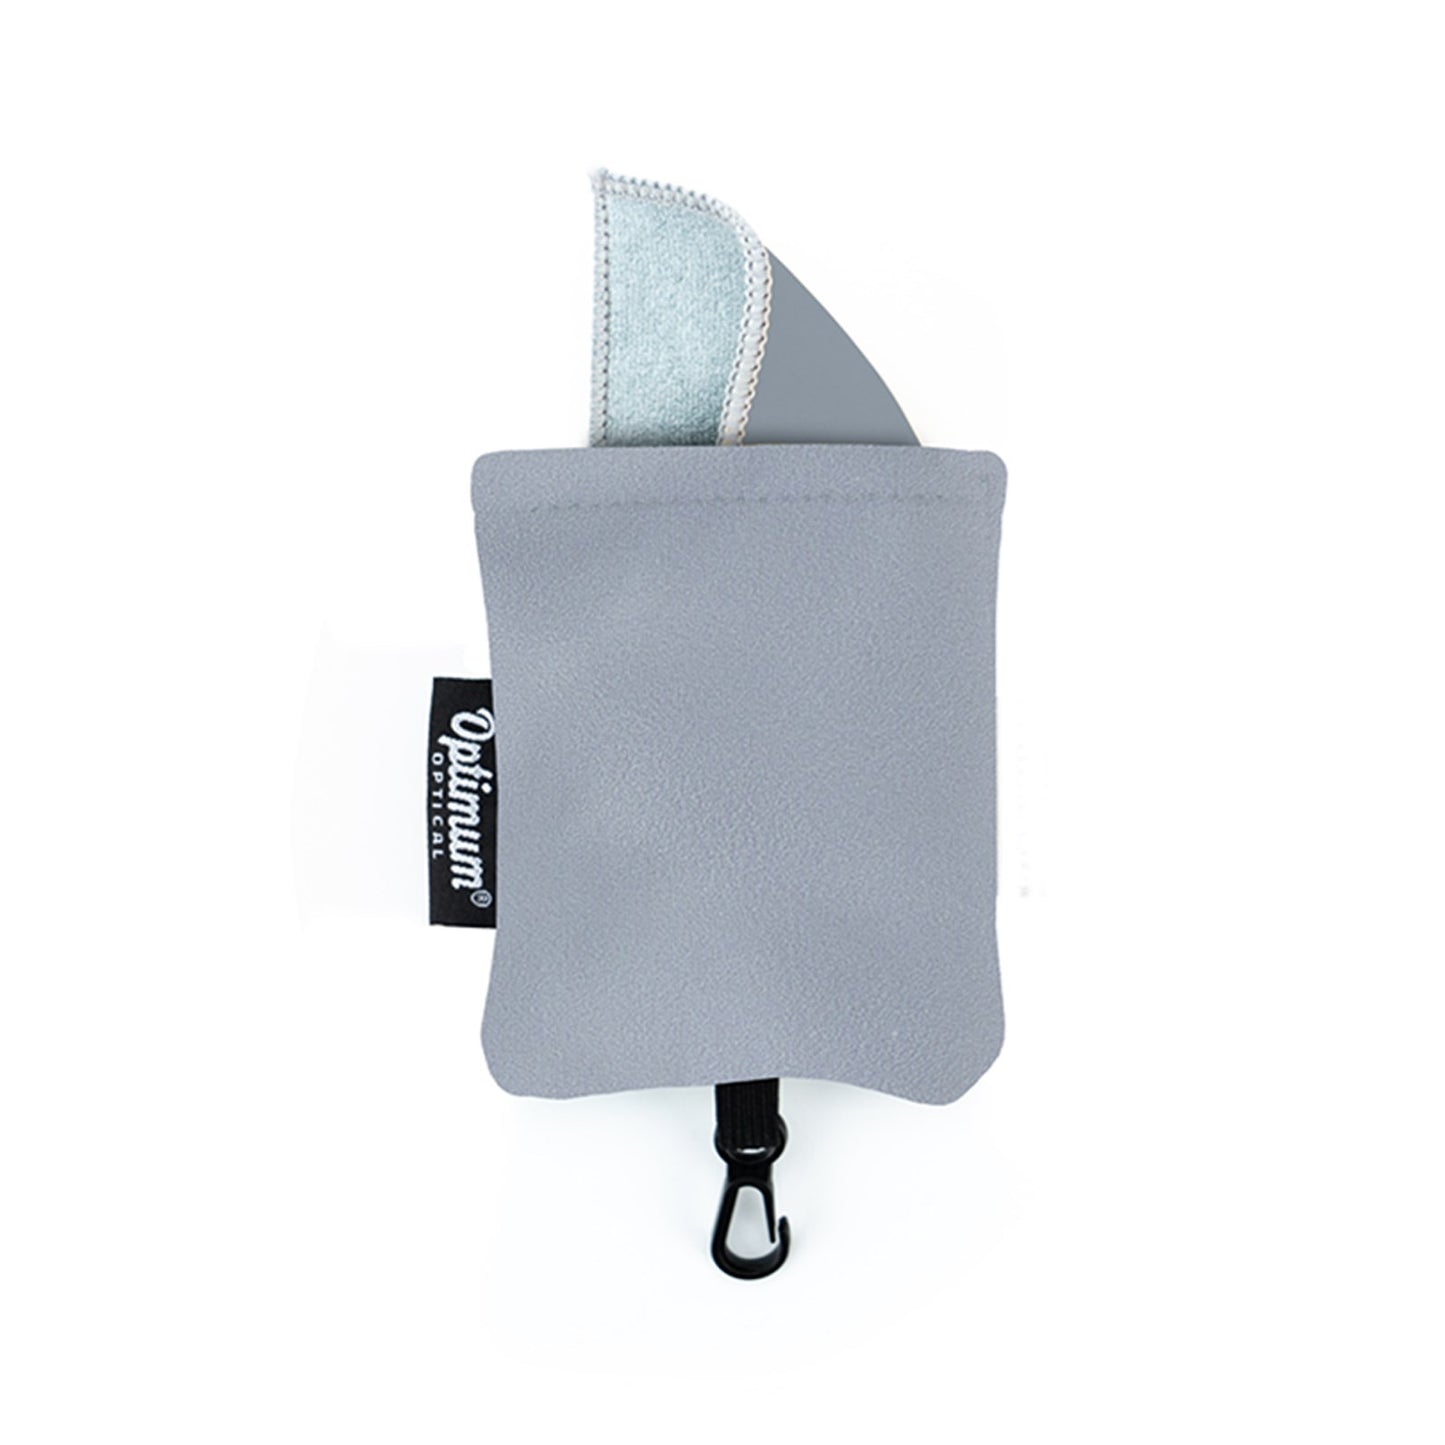 gray microfiber travel lens cloth on a white background